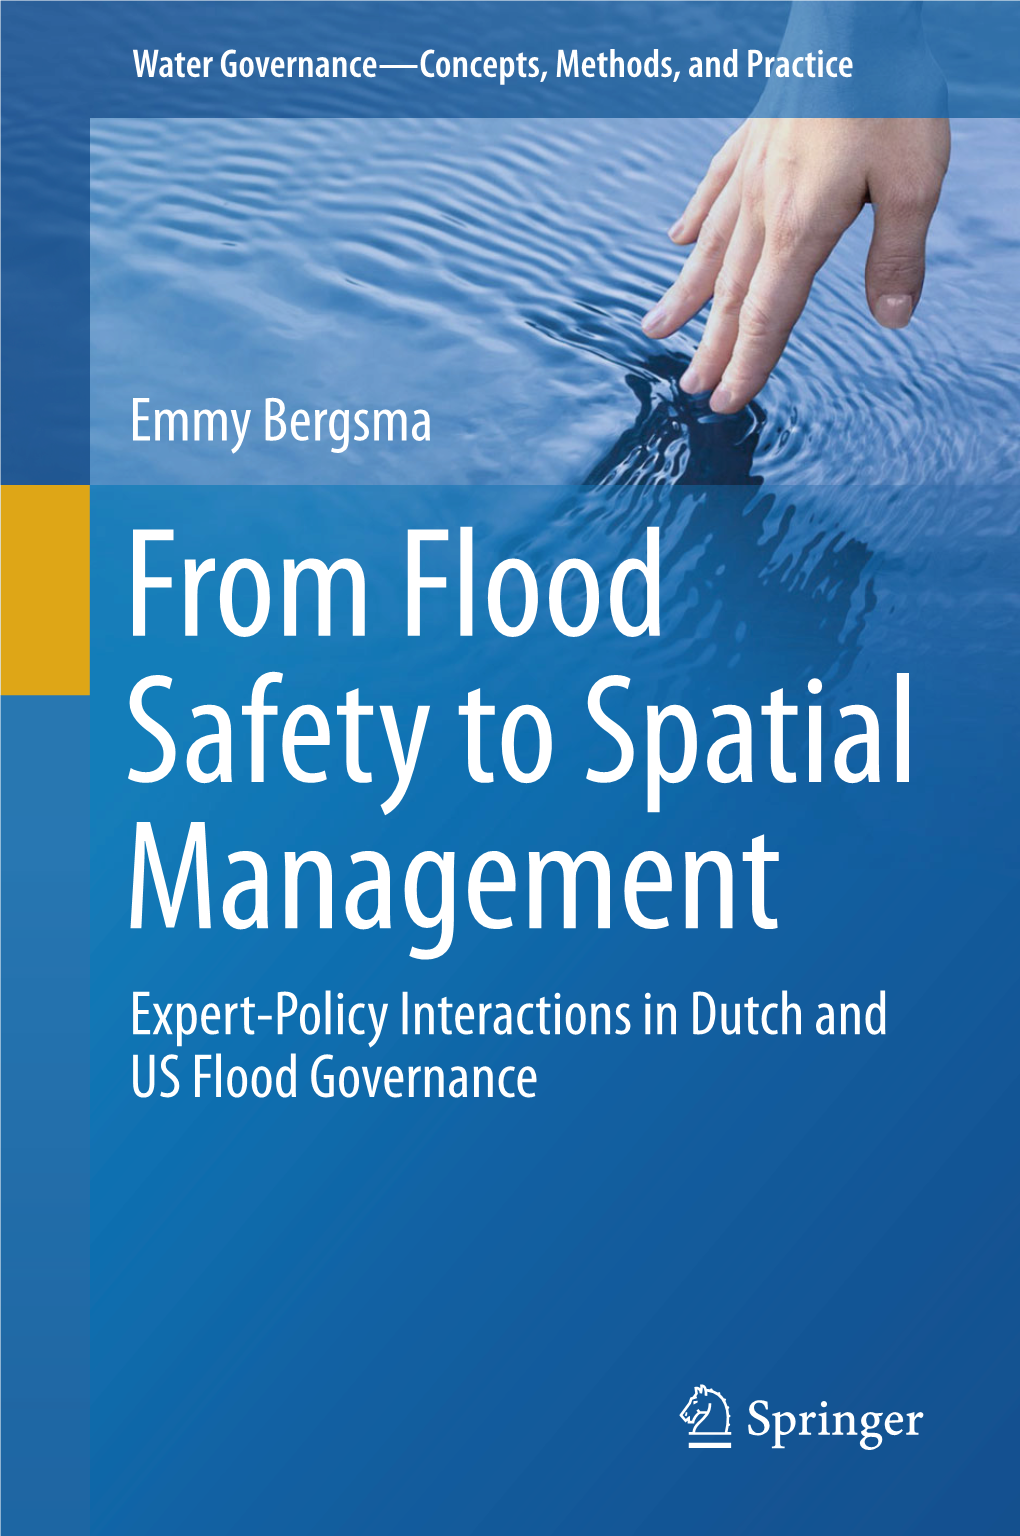 Emmy Bergsma Expert-Policy Interactions in Dutch and US Flood